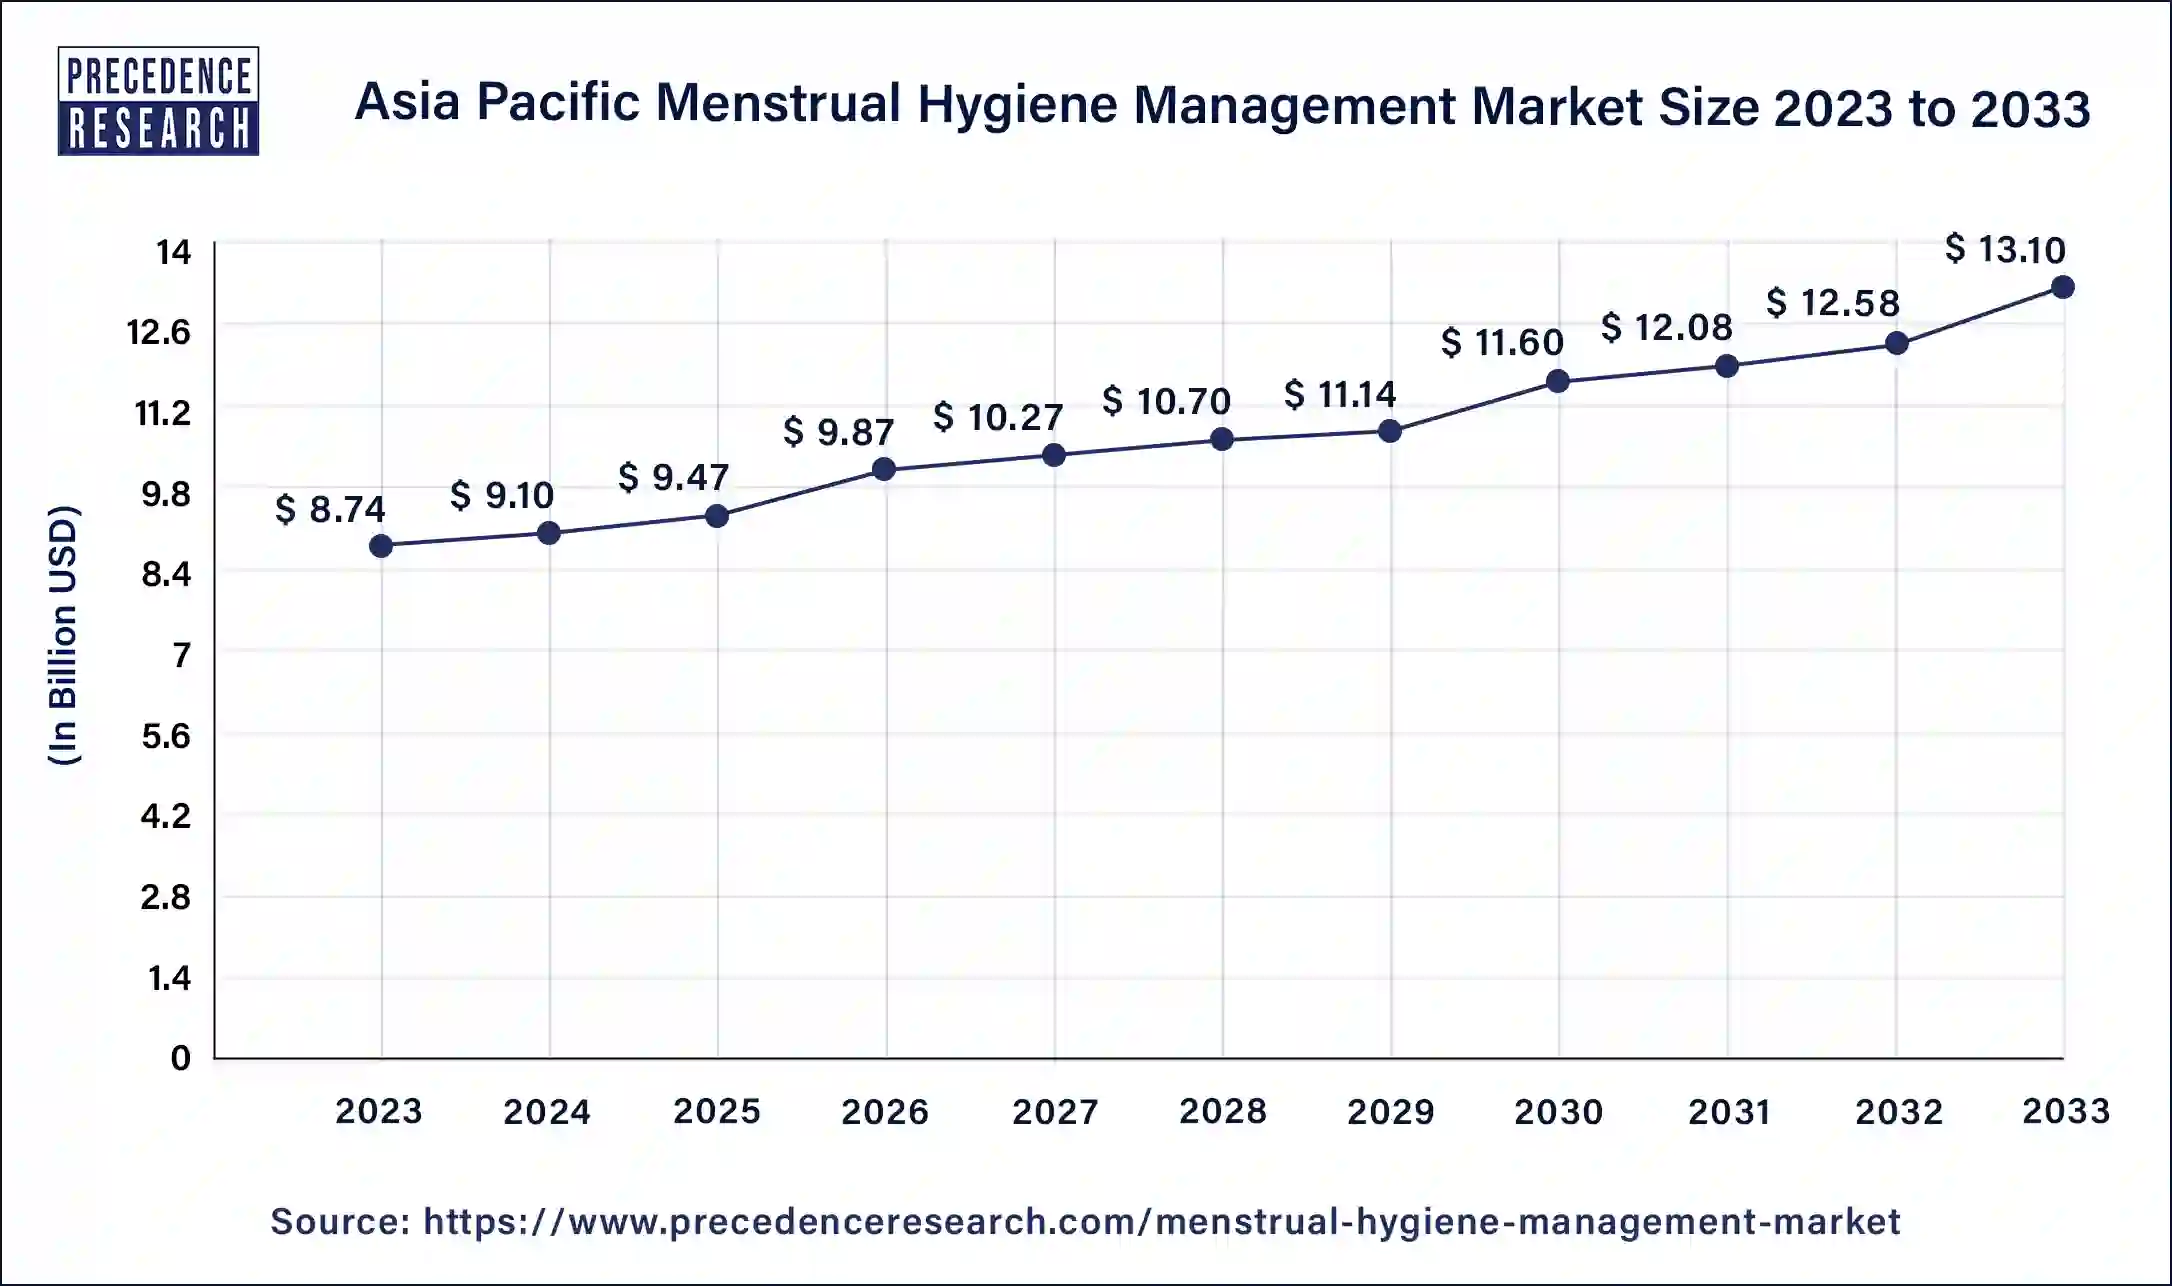 Asia Pacific Menstrual Hygiene Management Market Size 2024 to 2033